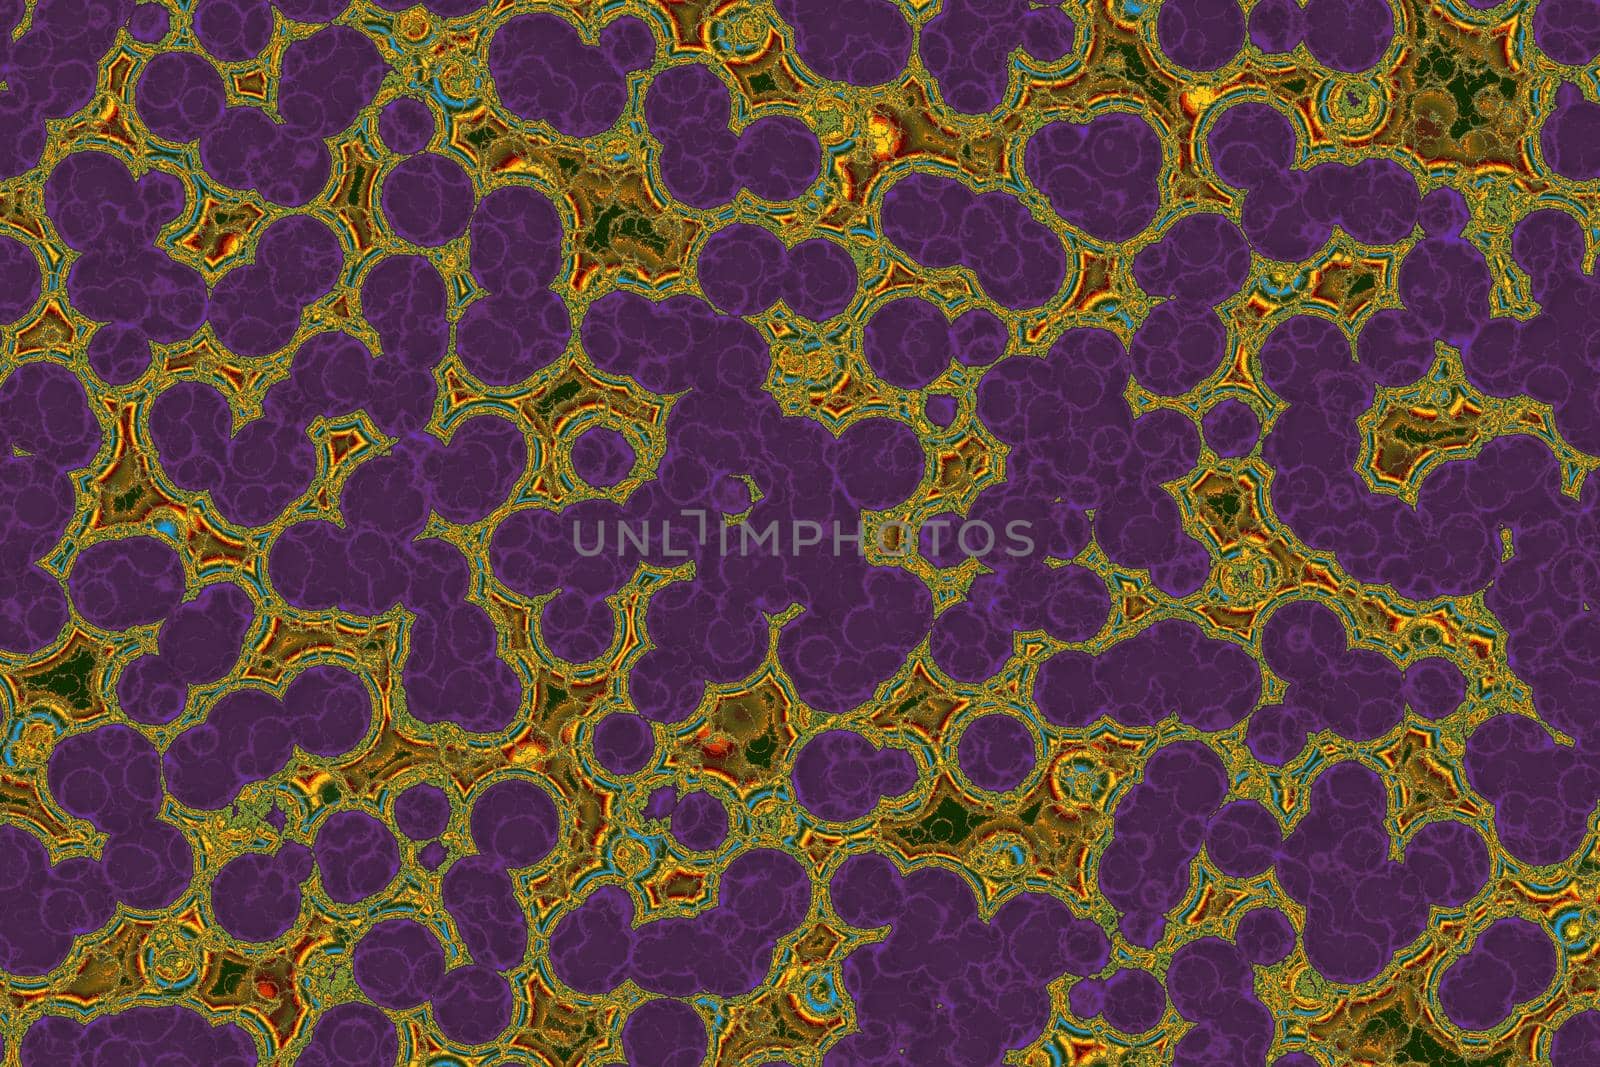 Fake Shape of bacterial cell: cocci. Molecular research microorganisms. microbiology scientific medicine illustration by berkay